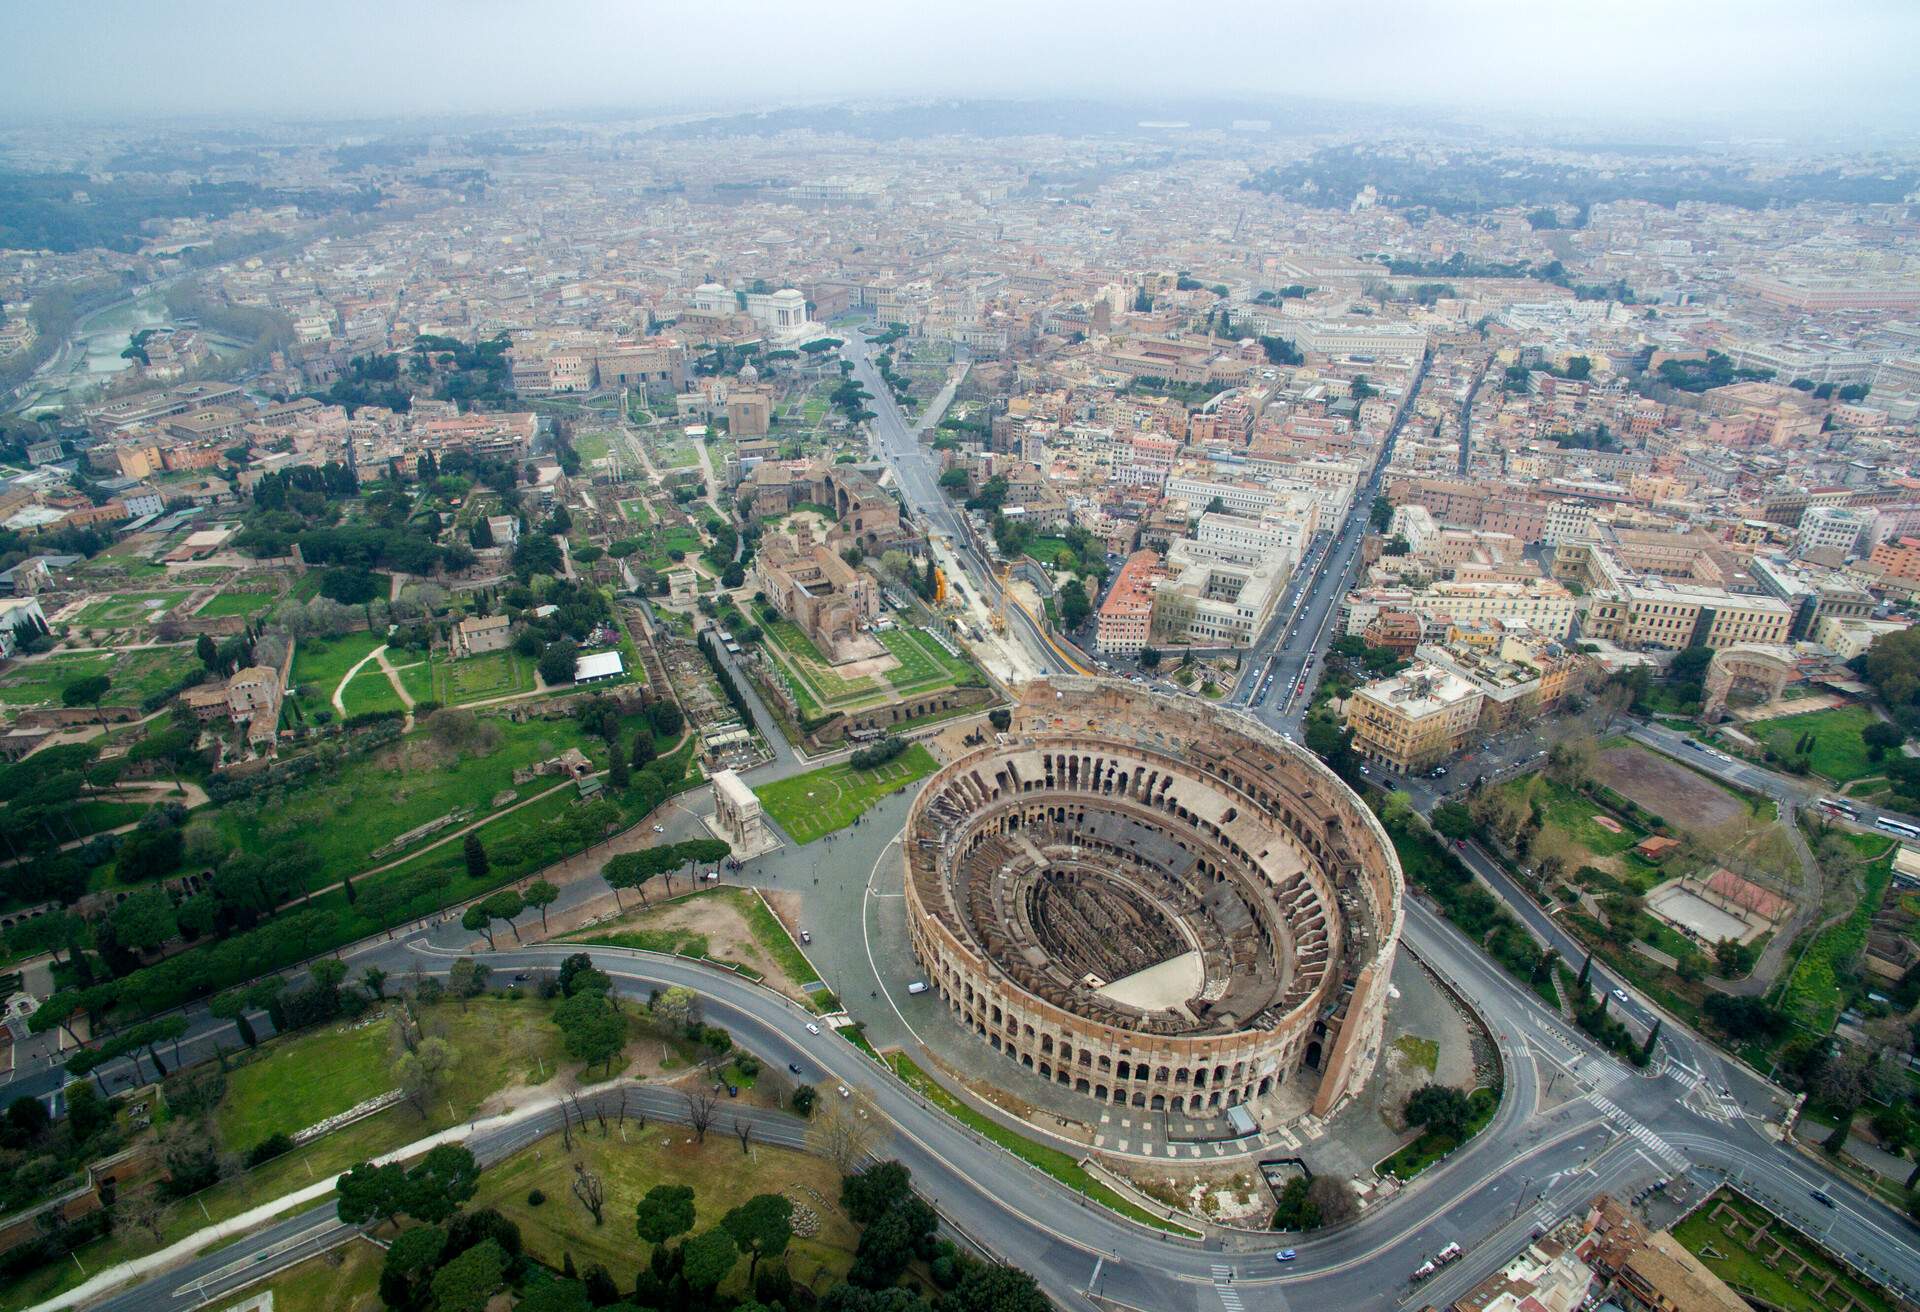 Aerial shot of the Colosseum in Rome, Italy